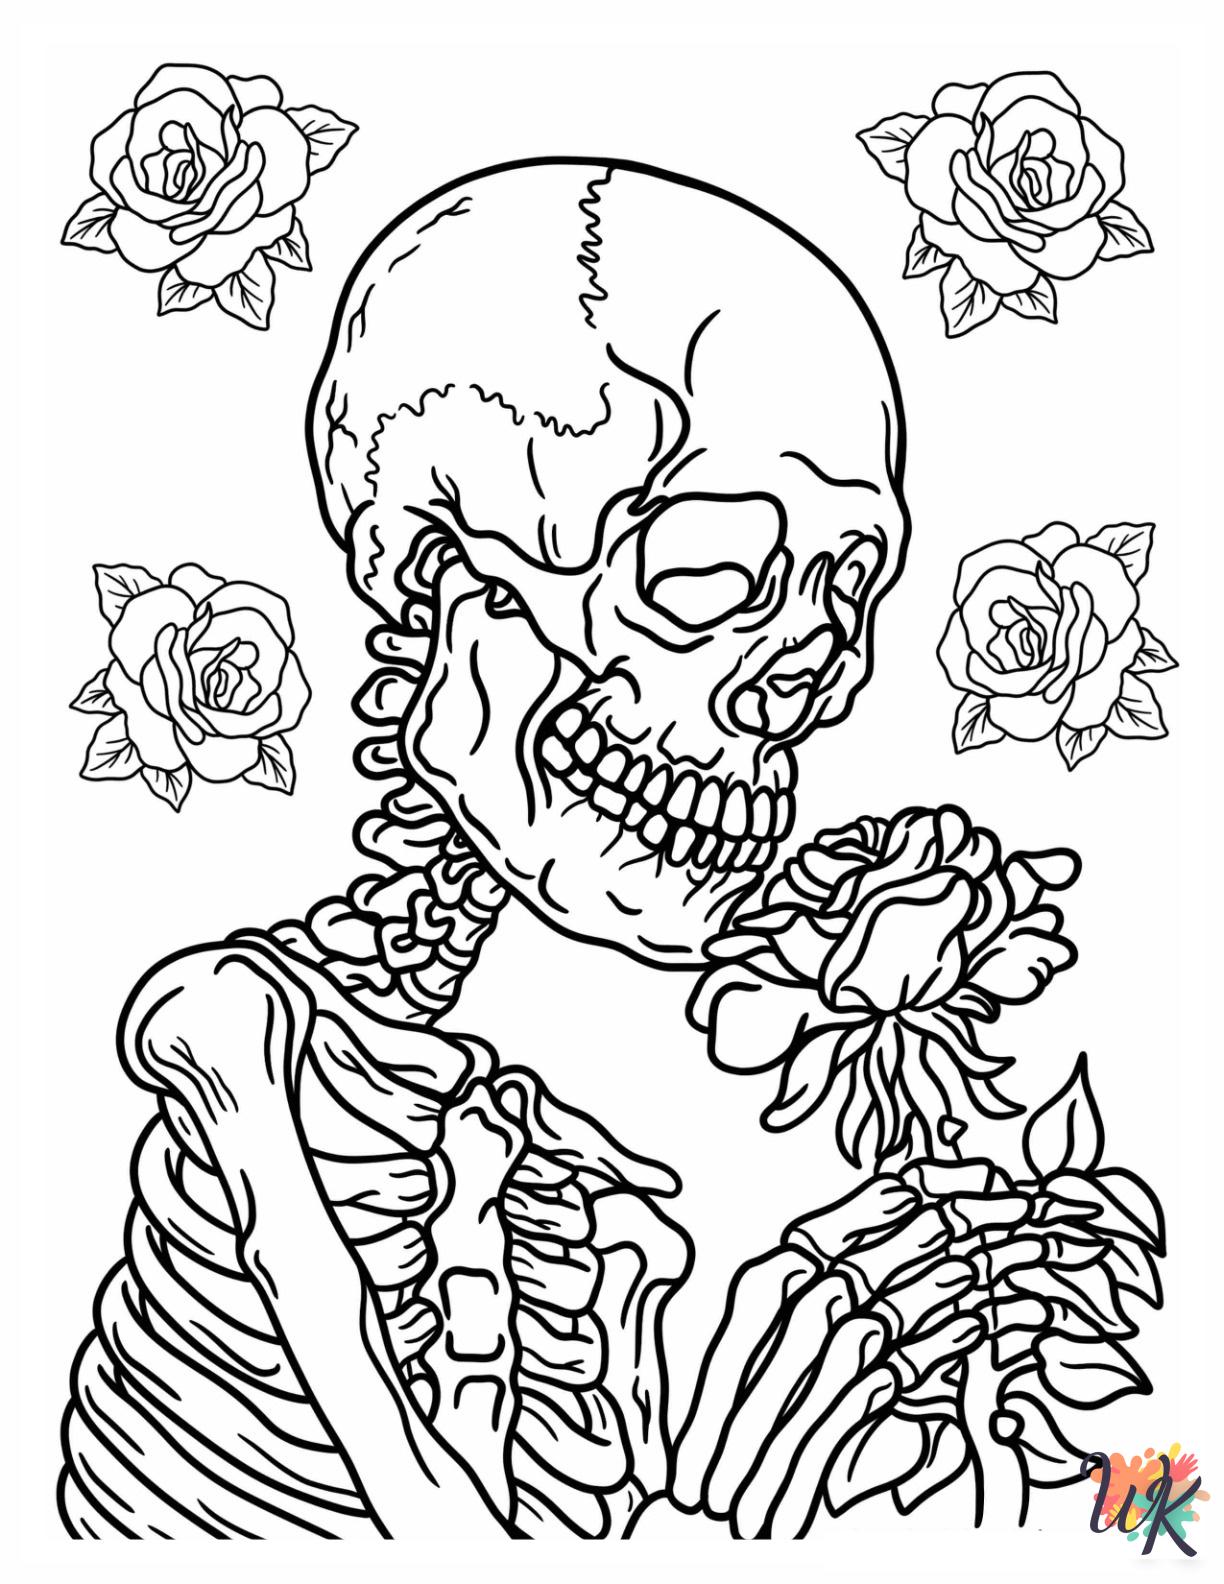 Skeleton Coloring Pages 12